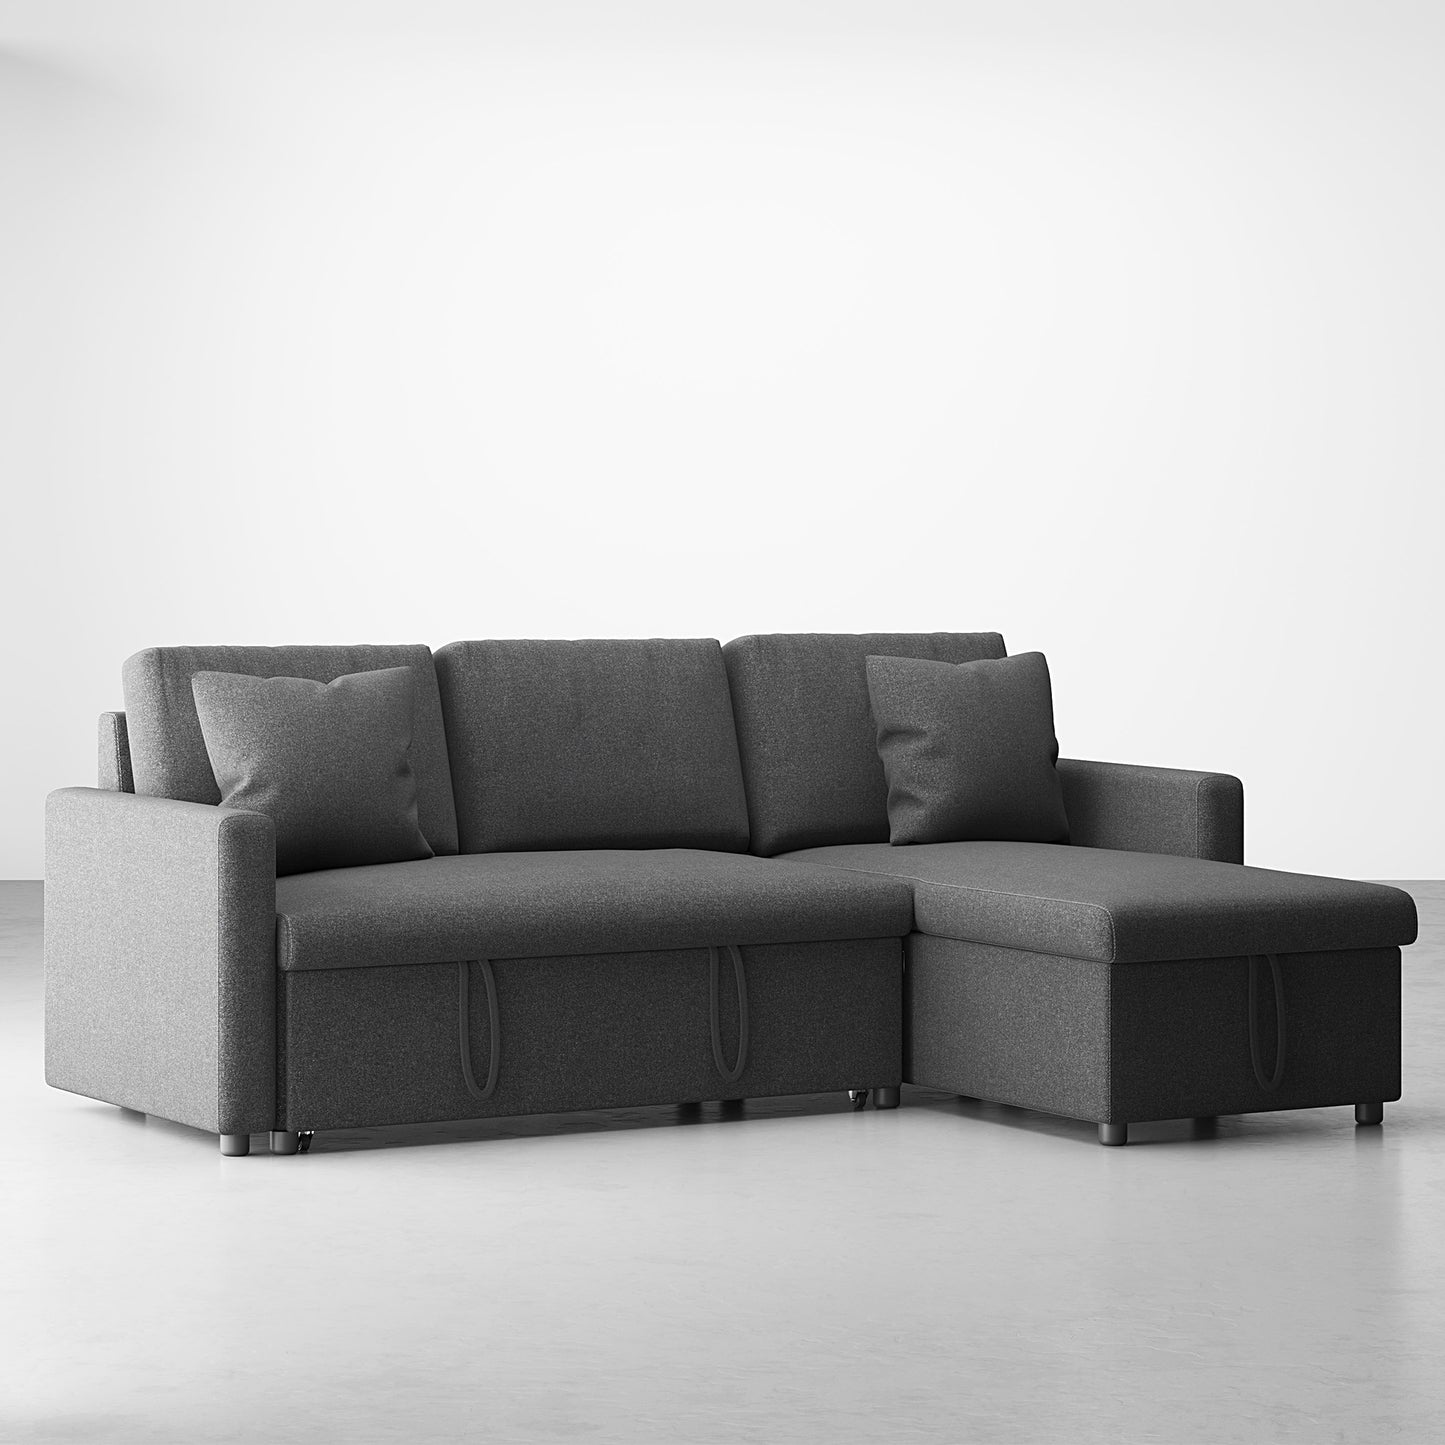 SogesPower 85" Sofa Set with Storage Chaise, Linen Fabric 3 Seater Couch, Dark Gray